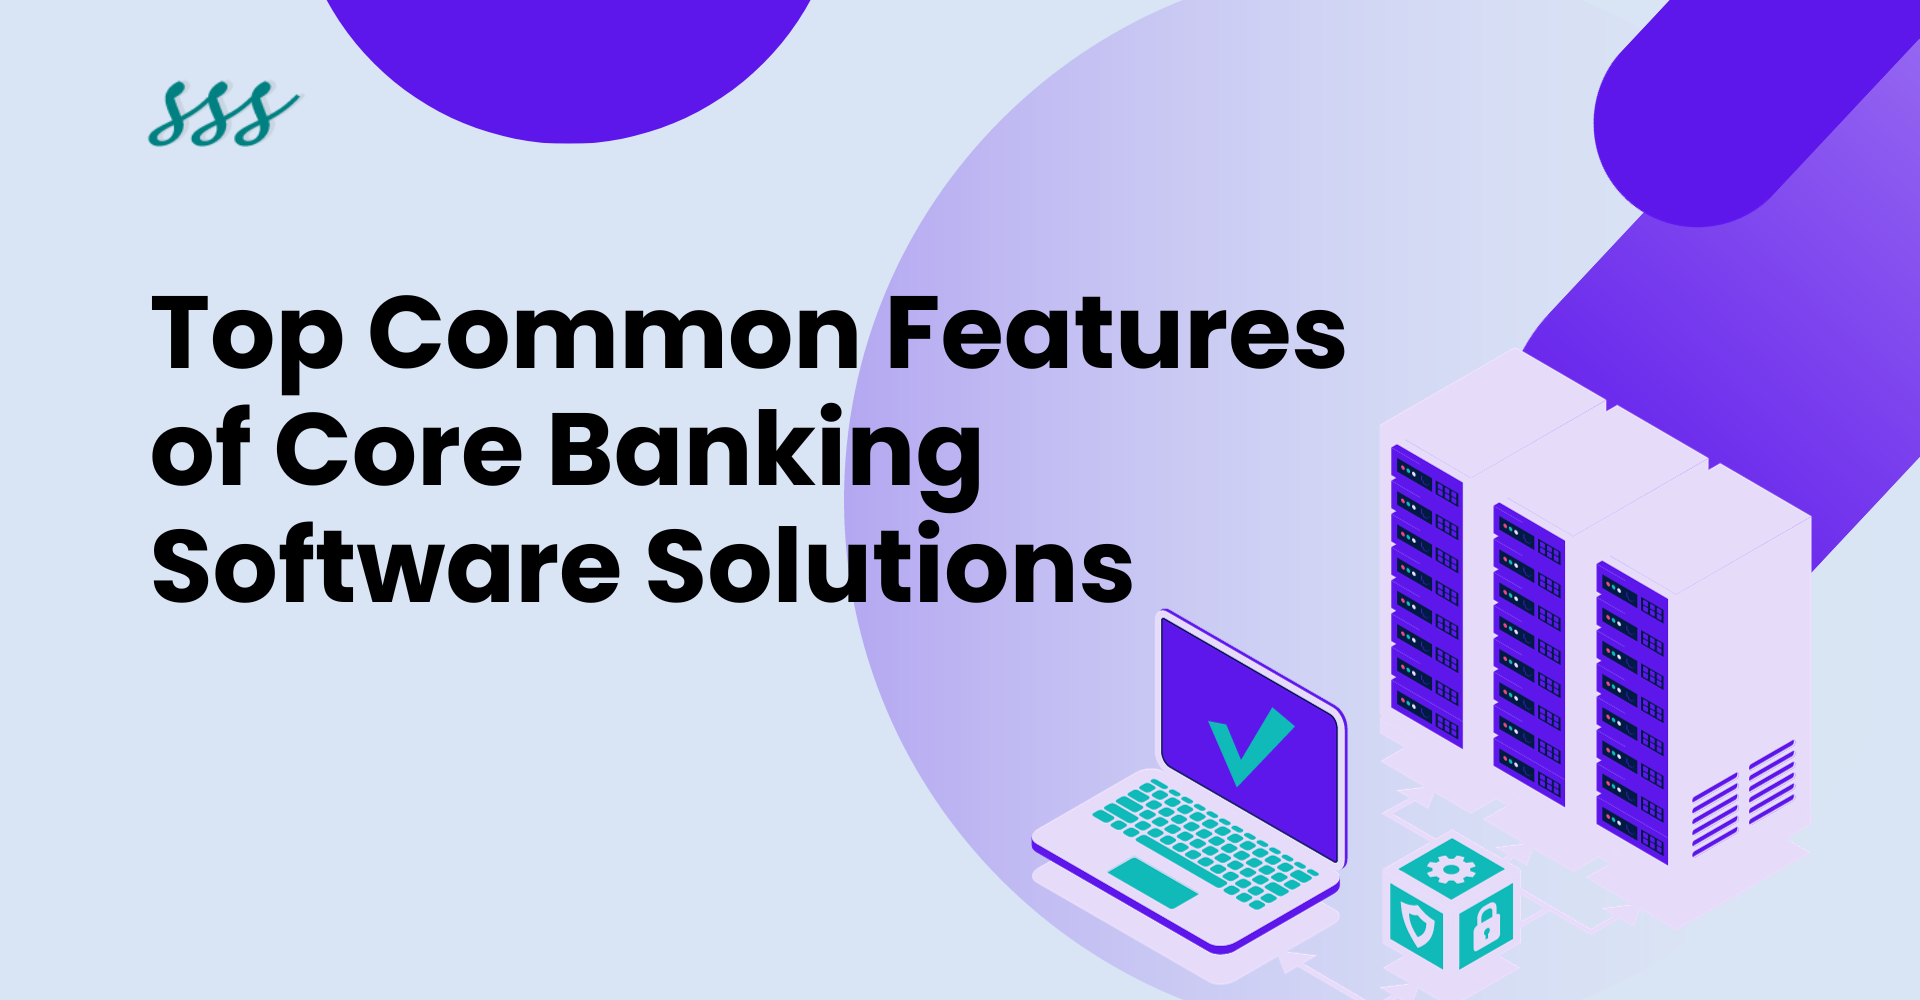 Core Banking Software Solutions